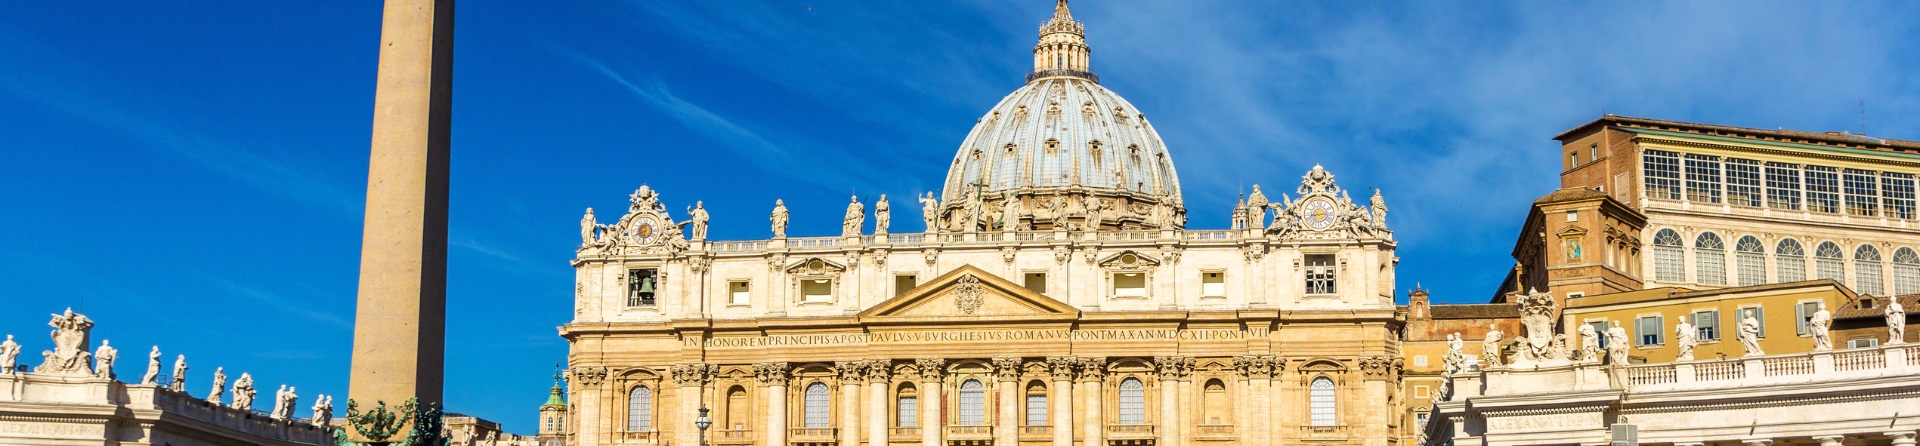 Is St Peter’s Basilica free to visit?